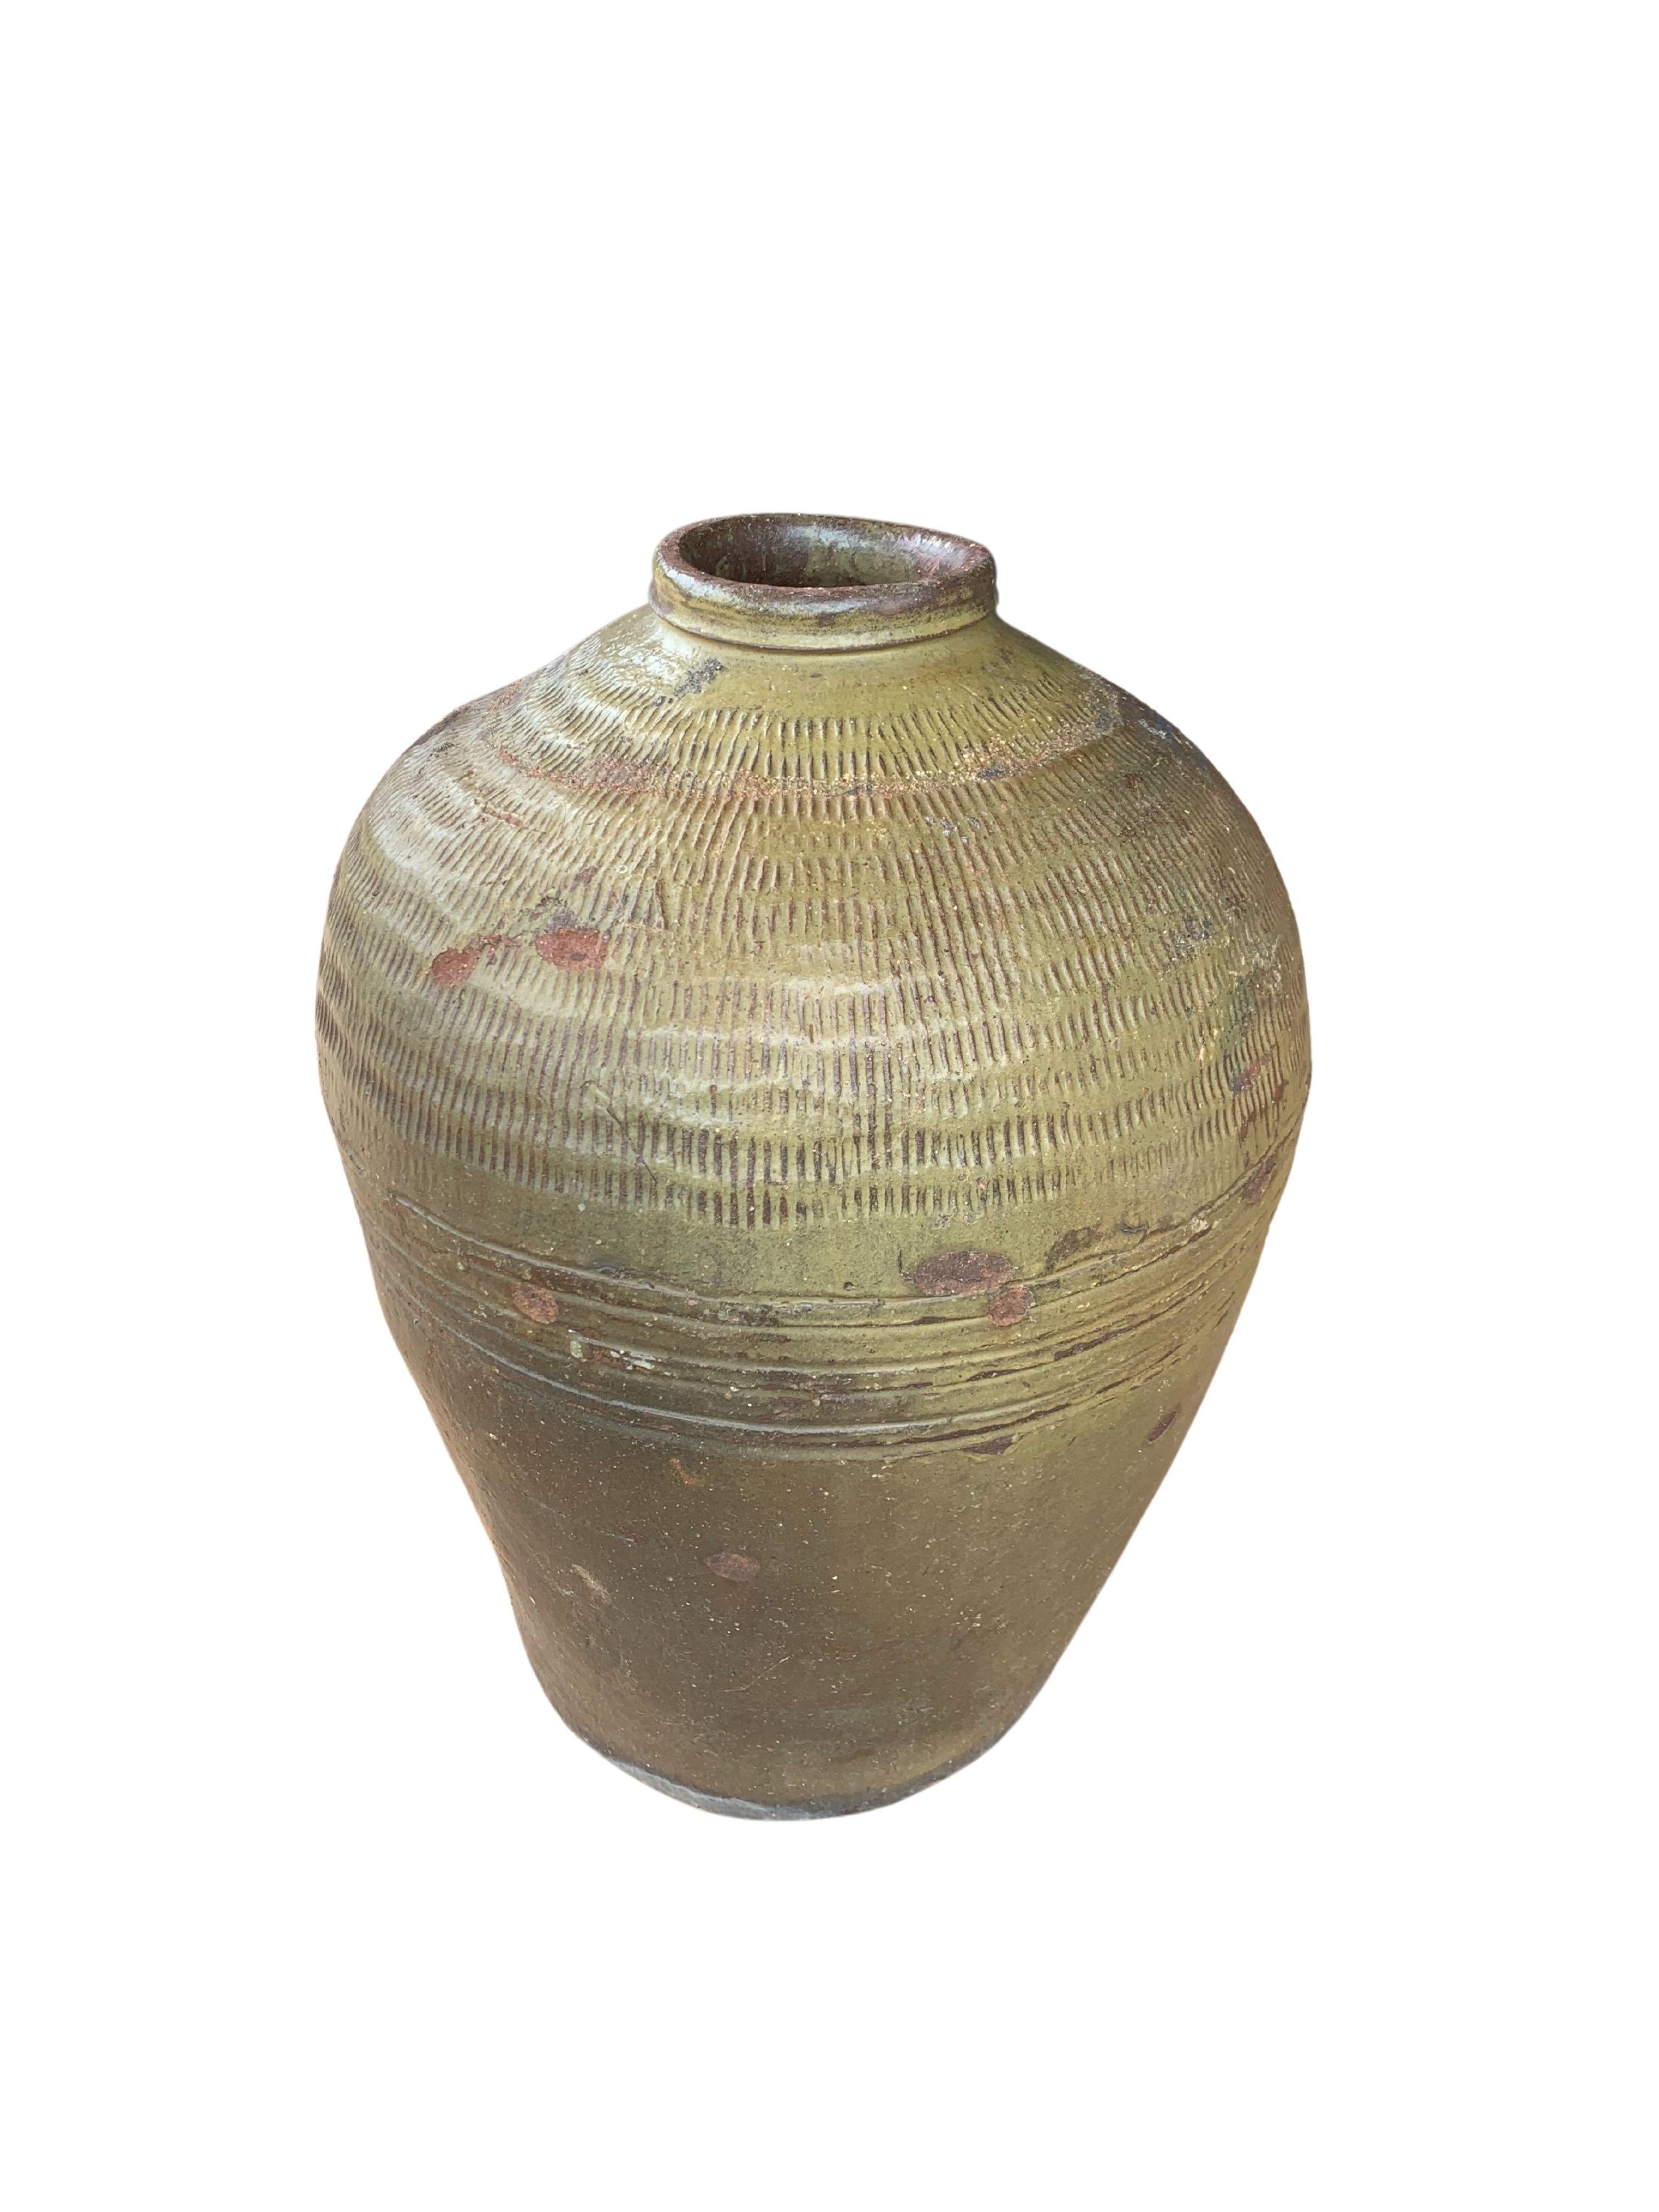 This glazed Chinese ceramic jar from the turn of the 19th Century was once used for pickling foods. It features a jade green finish and outer surface that features a ribbed texture. A great example of Chinese pottery, with its imperfections and